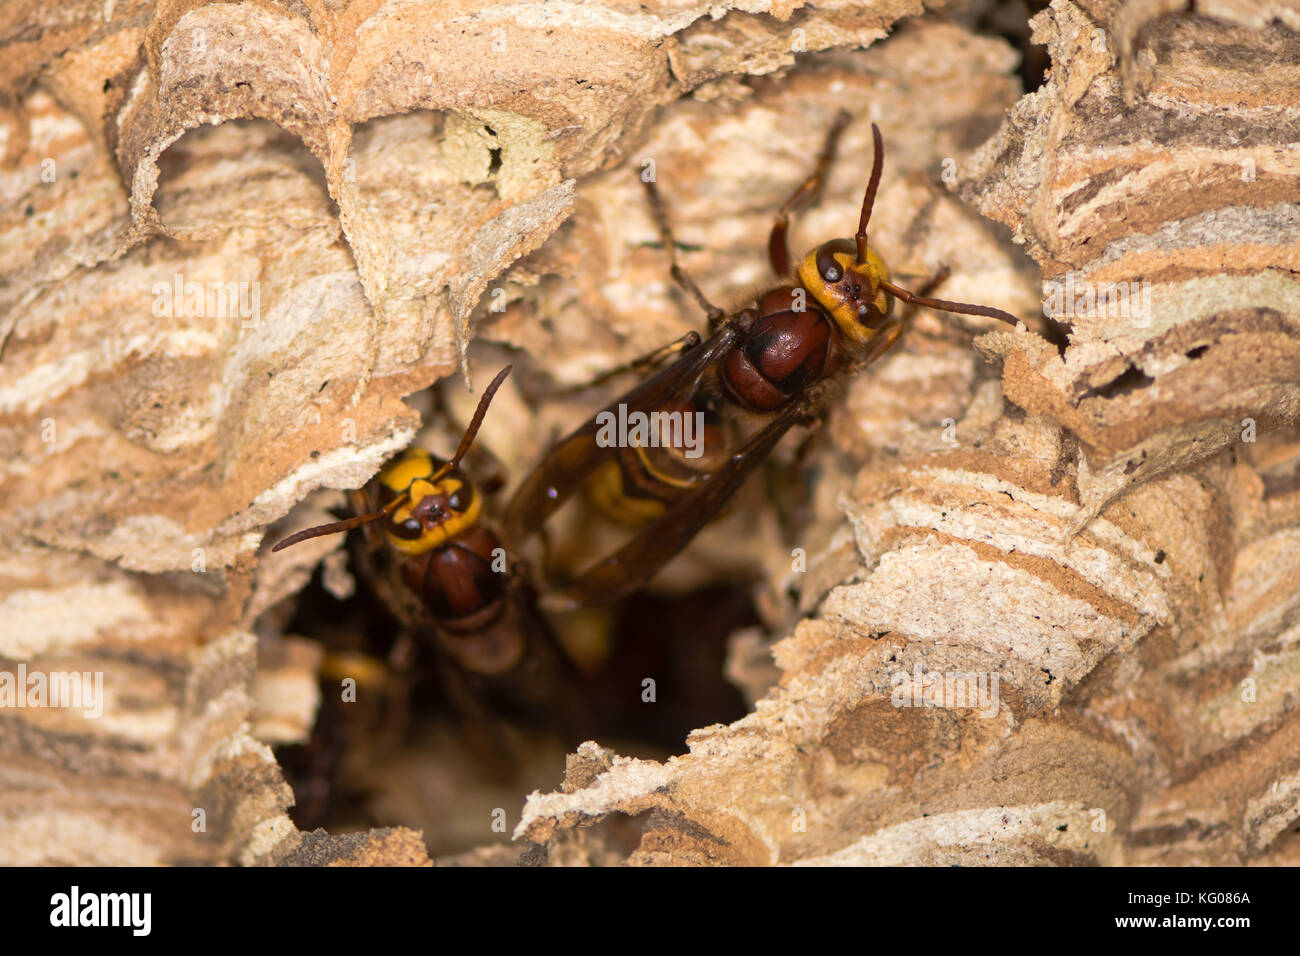 European hornets (Vespa crabro) emerging from hole in nest. Large wasps active at paper nest, showing defensive behaviour, in Wiltshire, UK Stock Photo